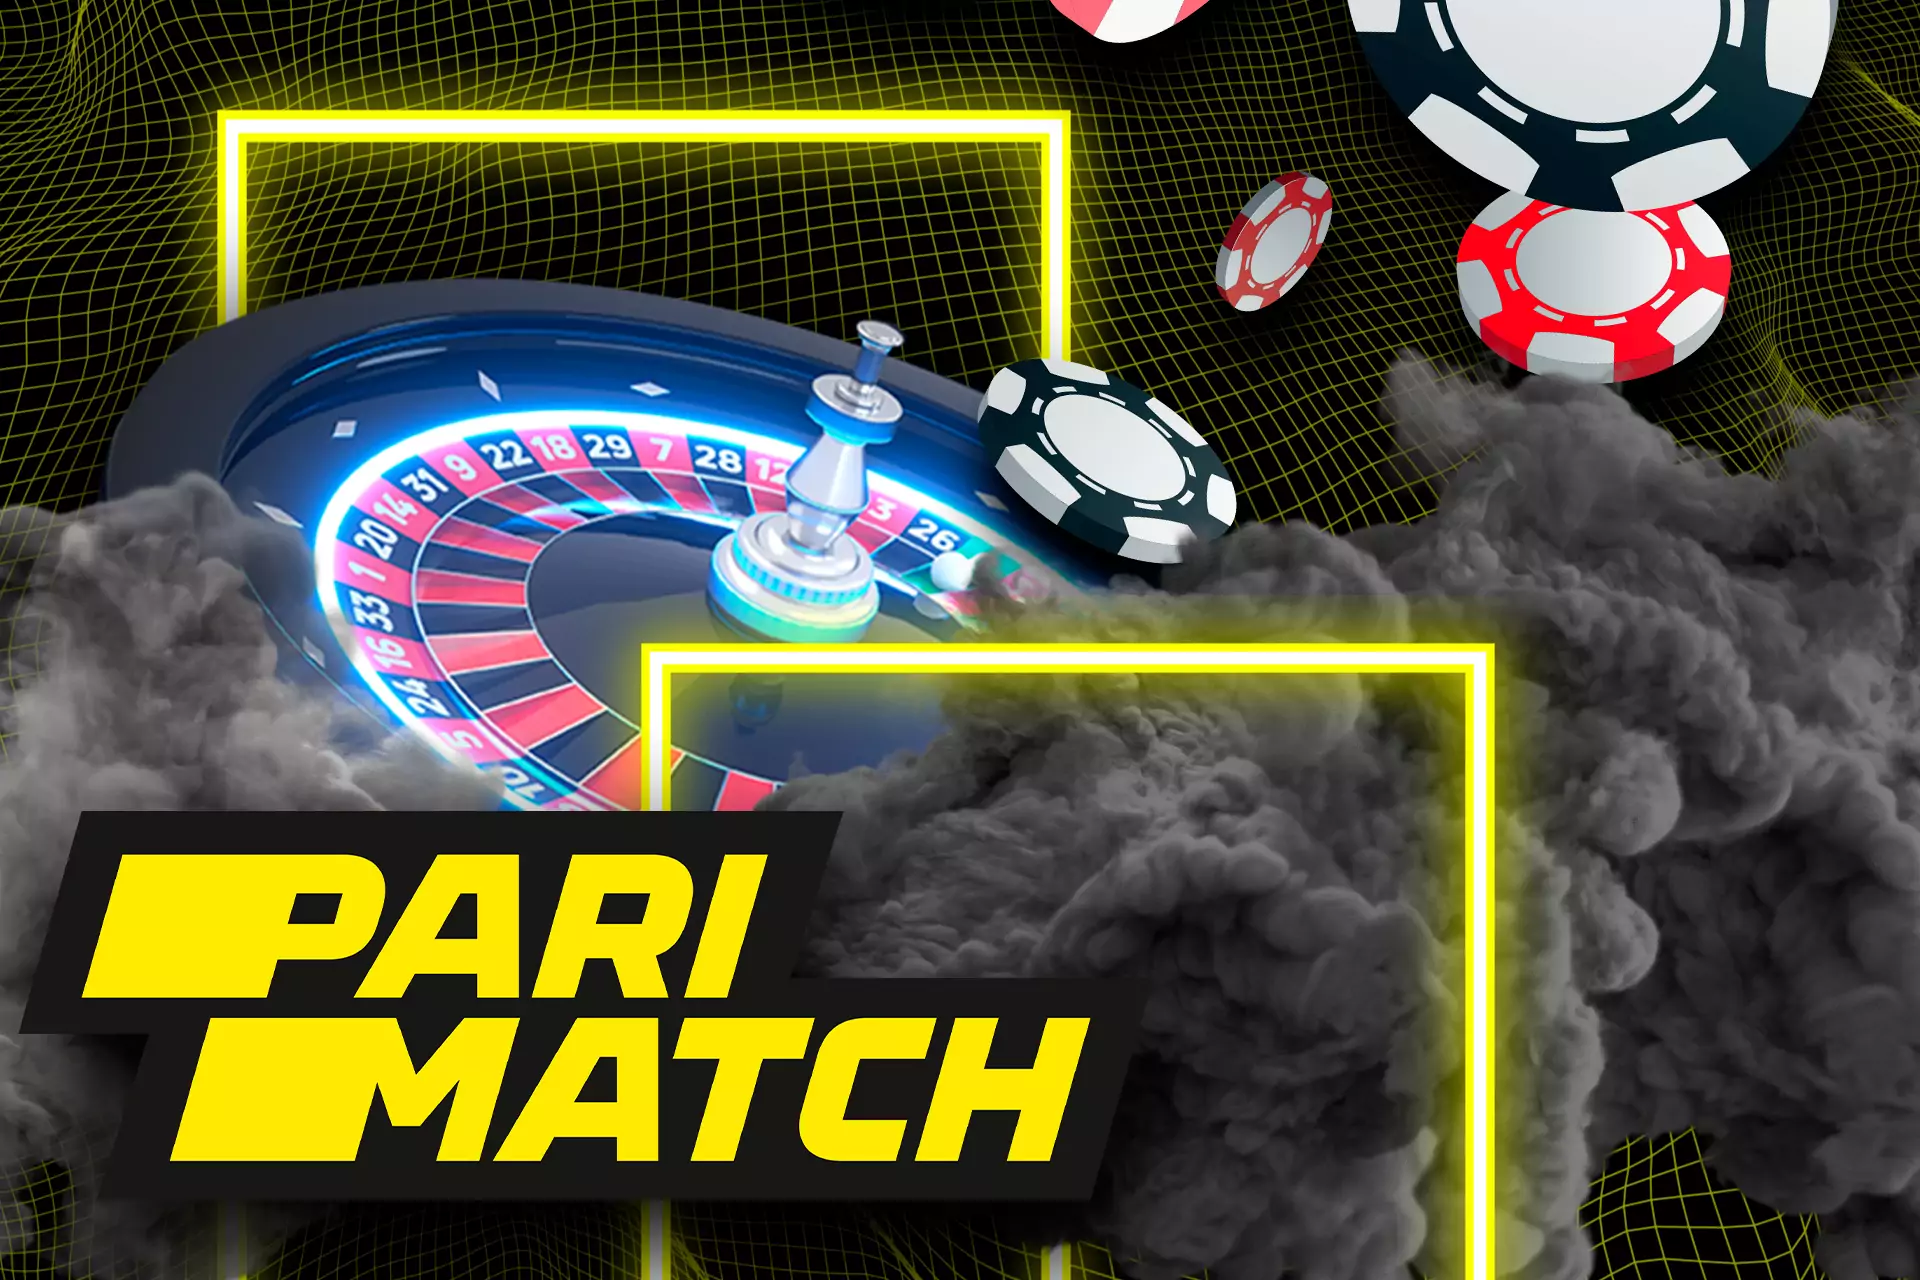 At Parimatch Casino you can deep into over 1000 types of slots, table games, and live casinos.